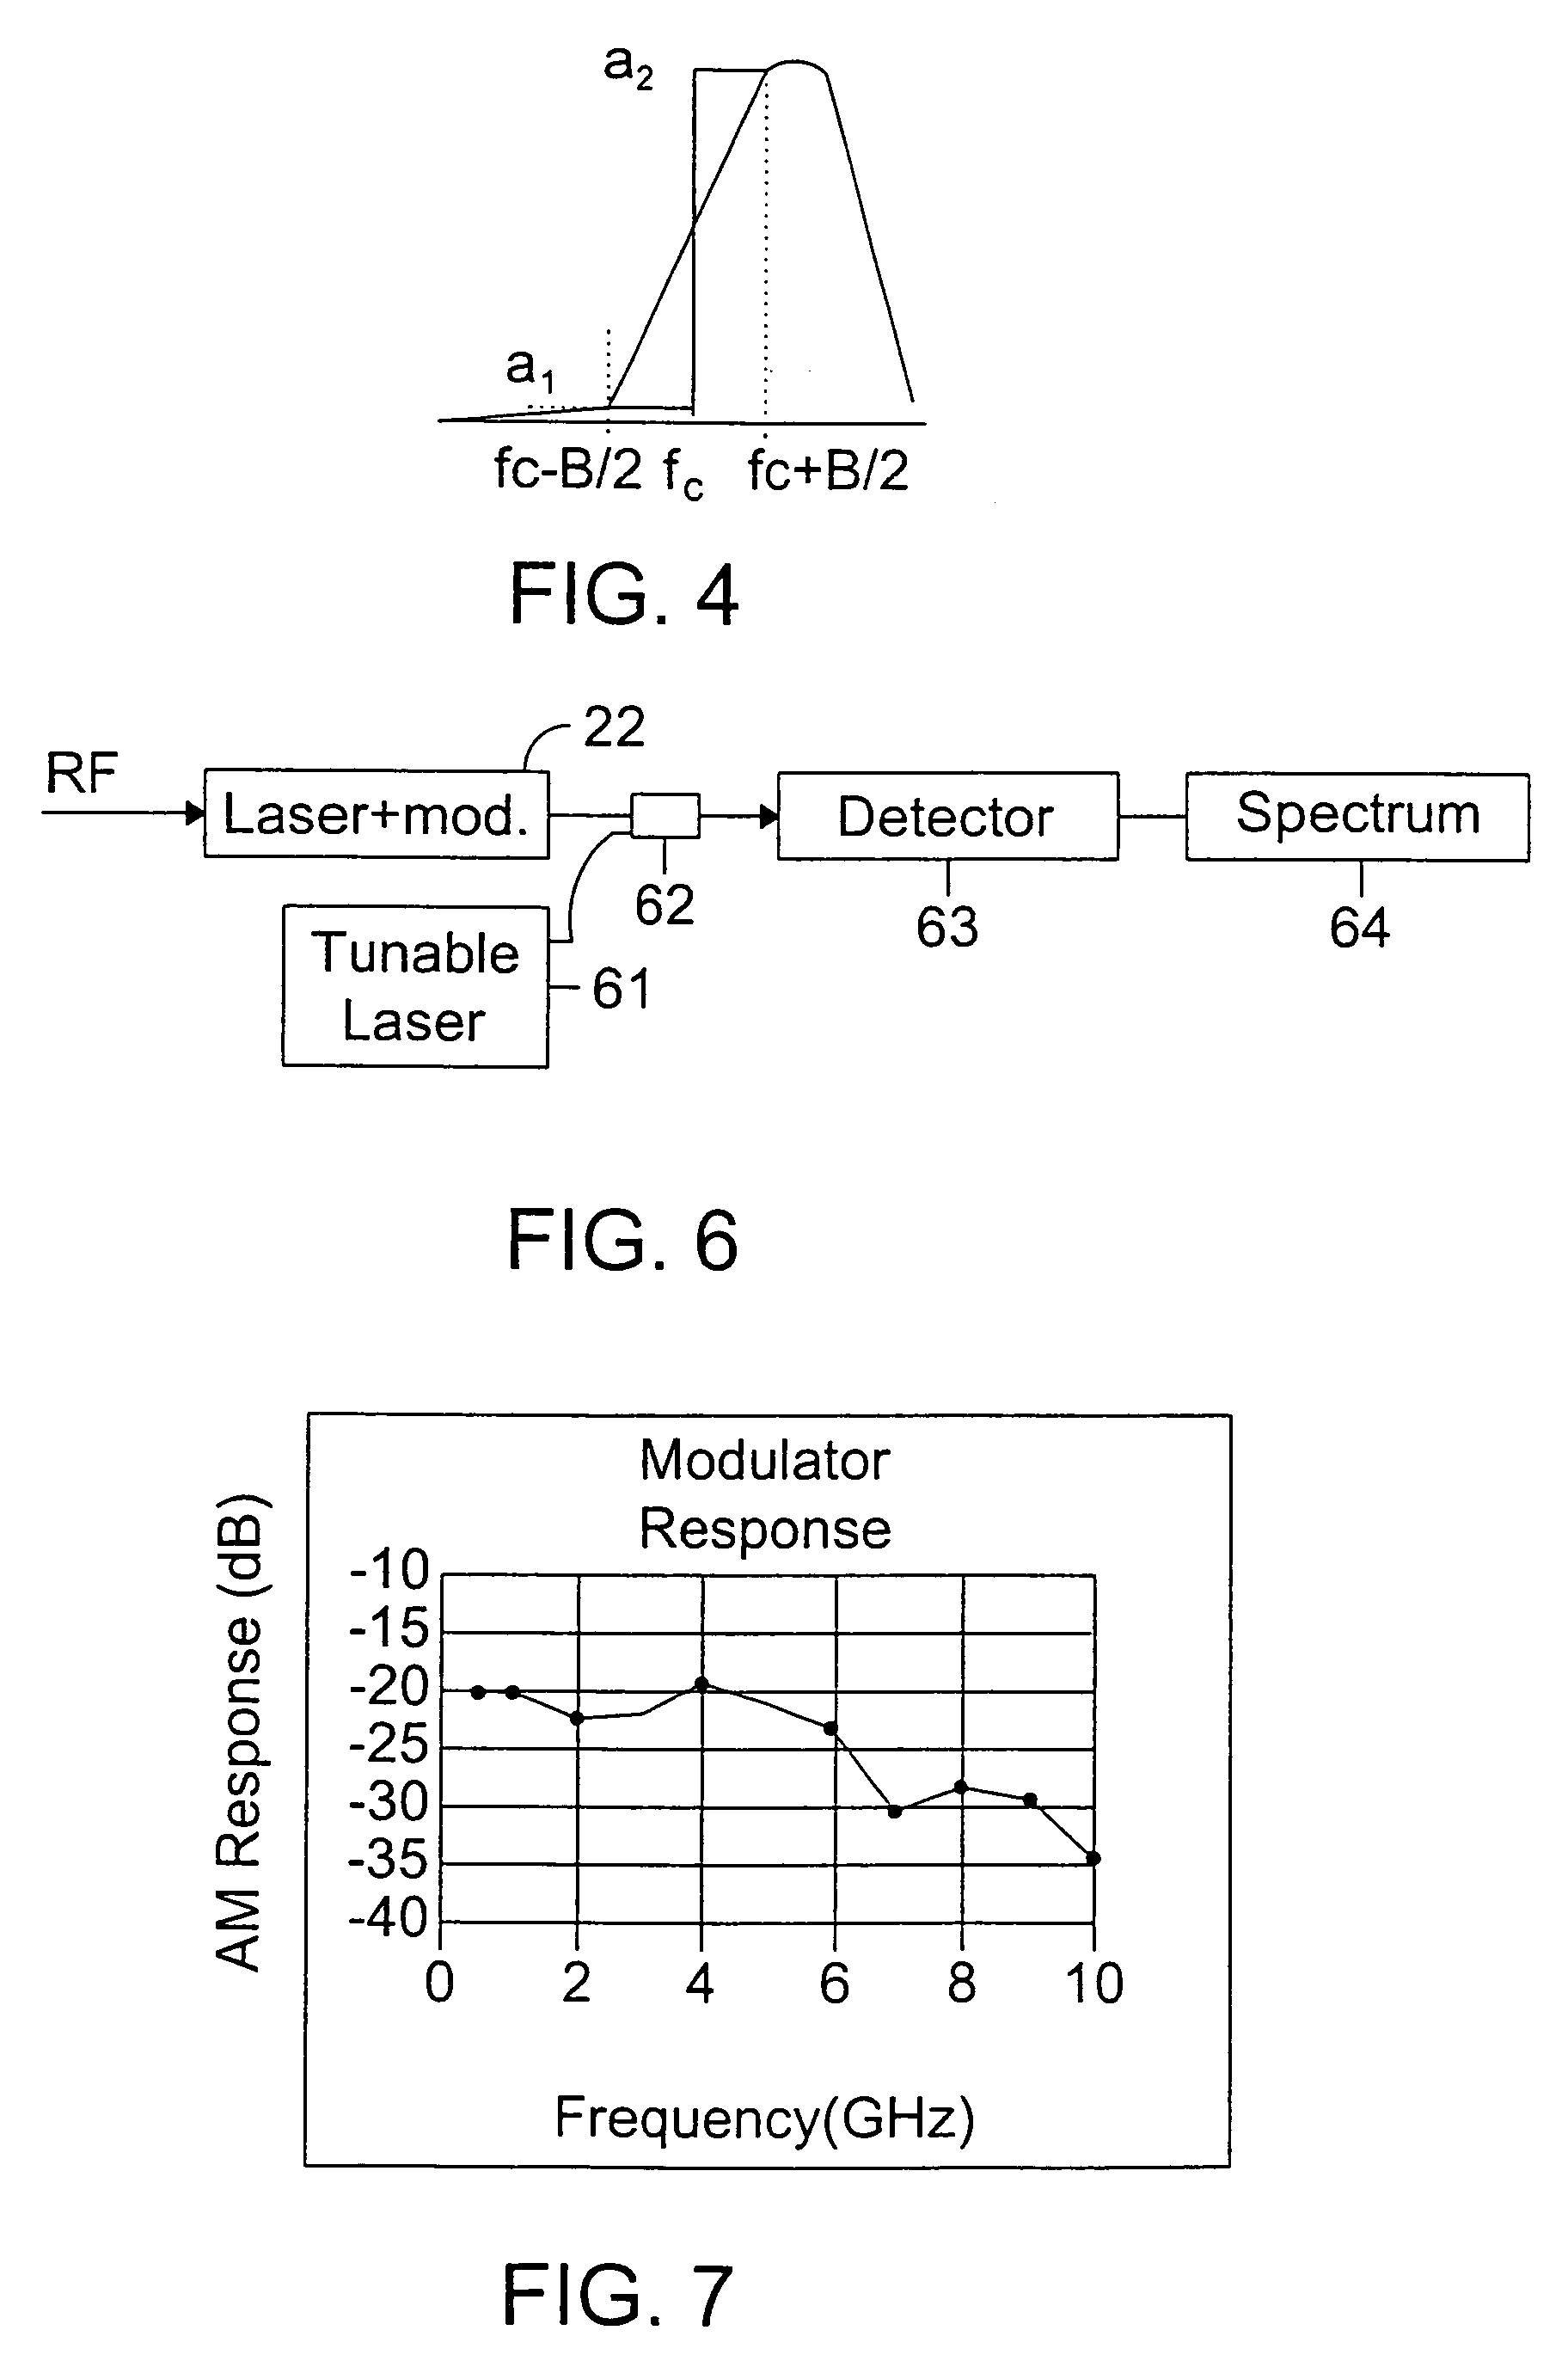 System and method for generating analog transmission signals